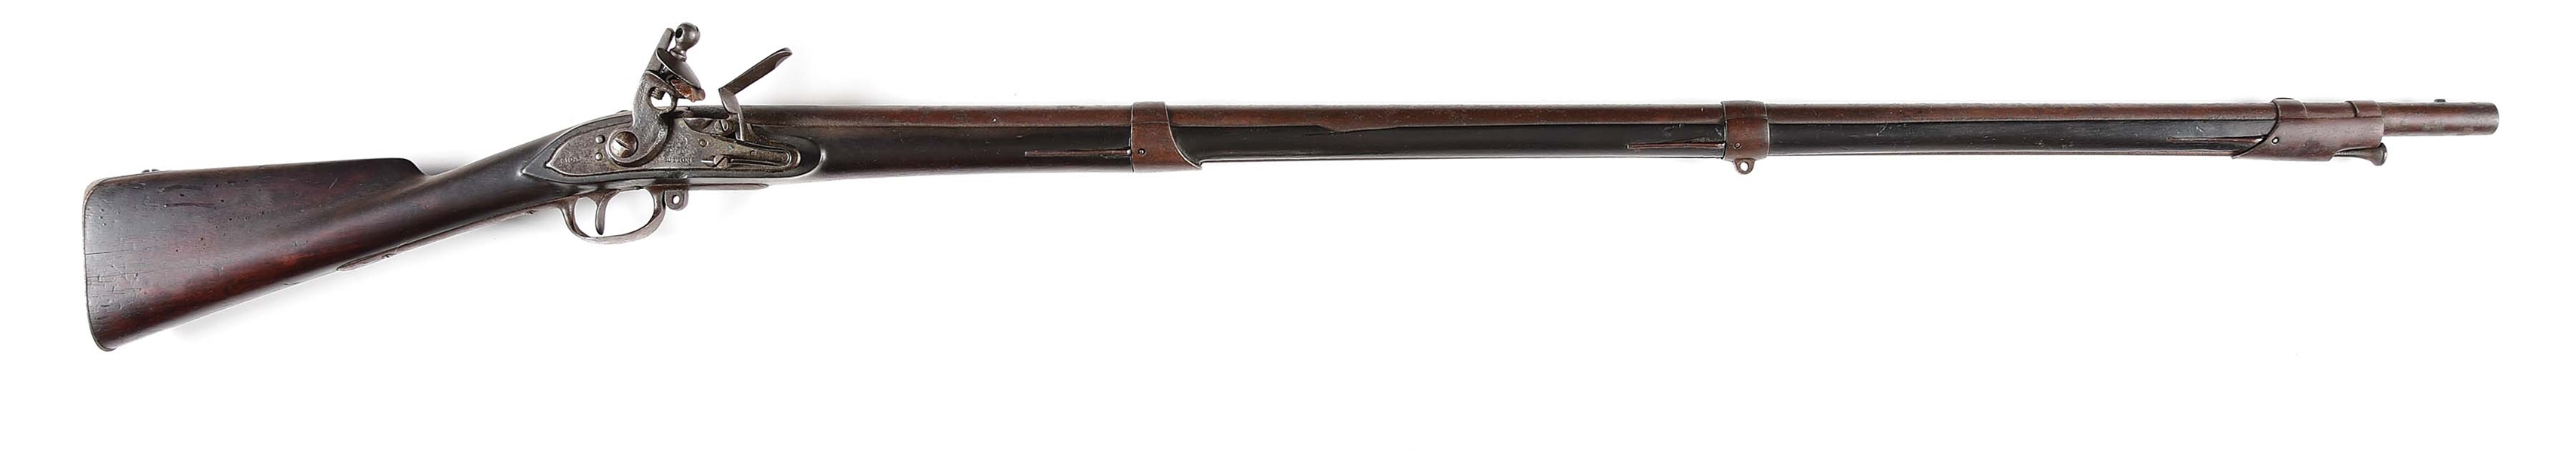 (A) WATERS & WHITMORE FEDERAL CONTRACT SUTTON MODEL 1808 .69 CALIBER FLINTLOCK MUSKET DATED 1810.